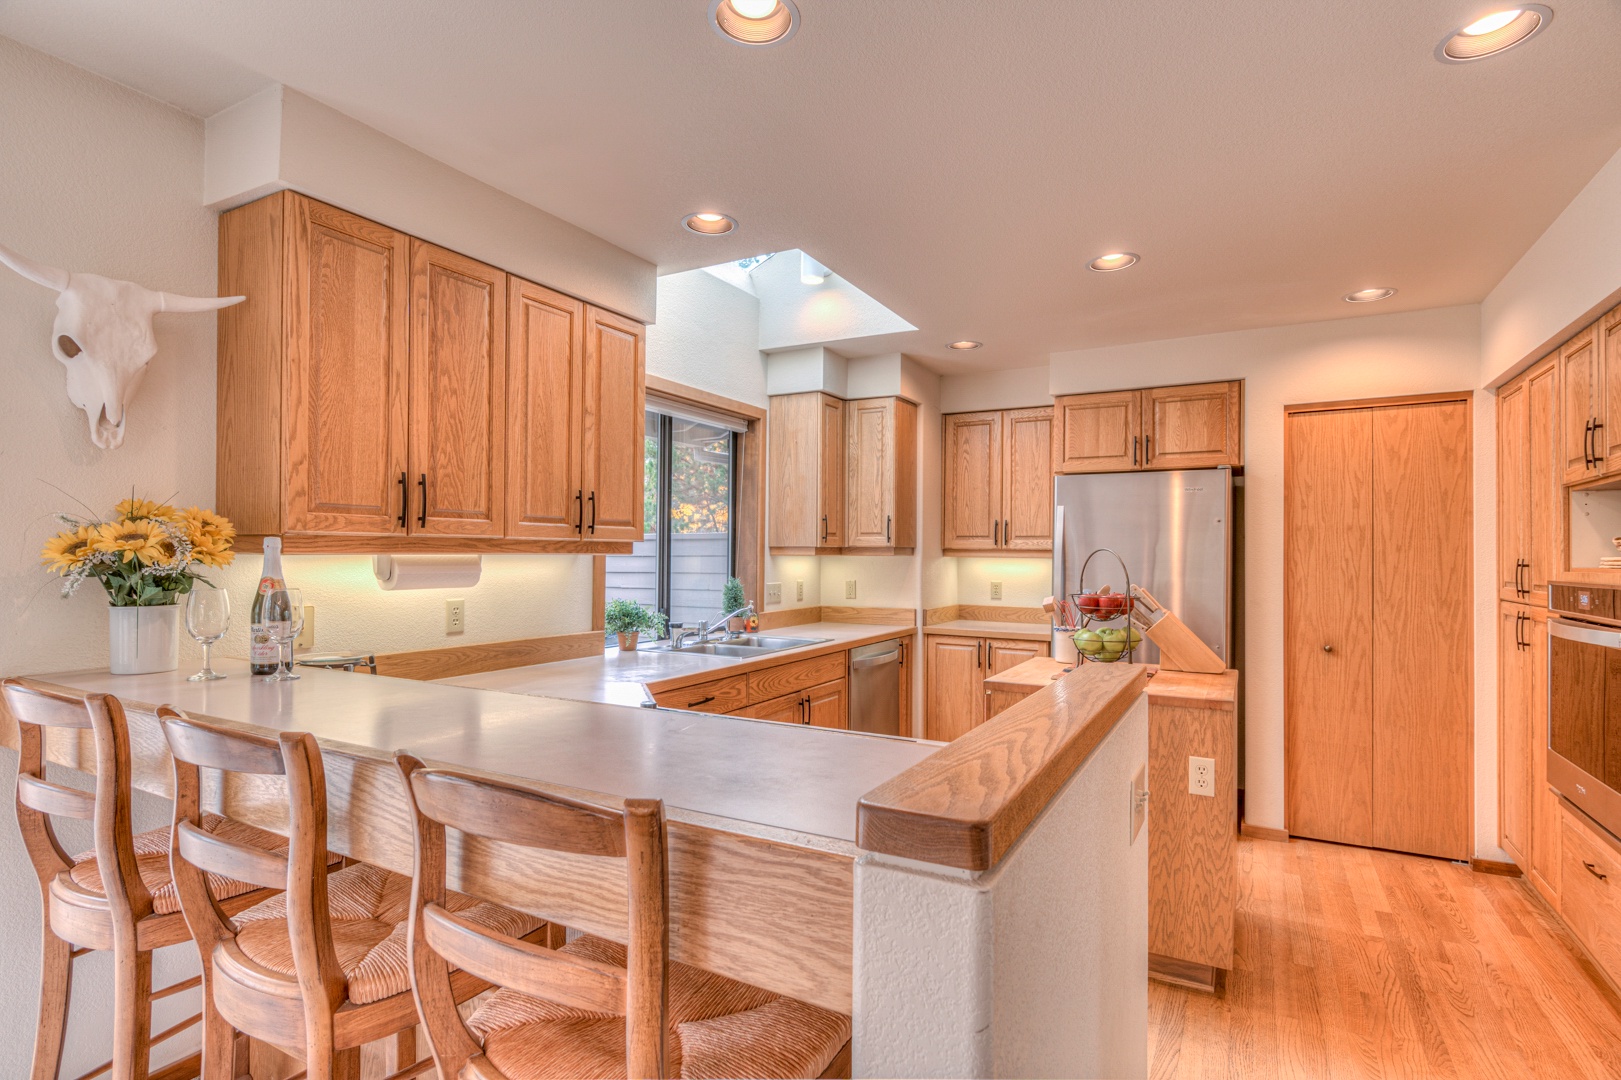 Great kitchen space with center Island